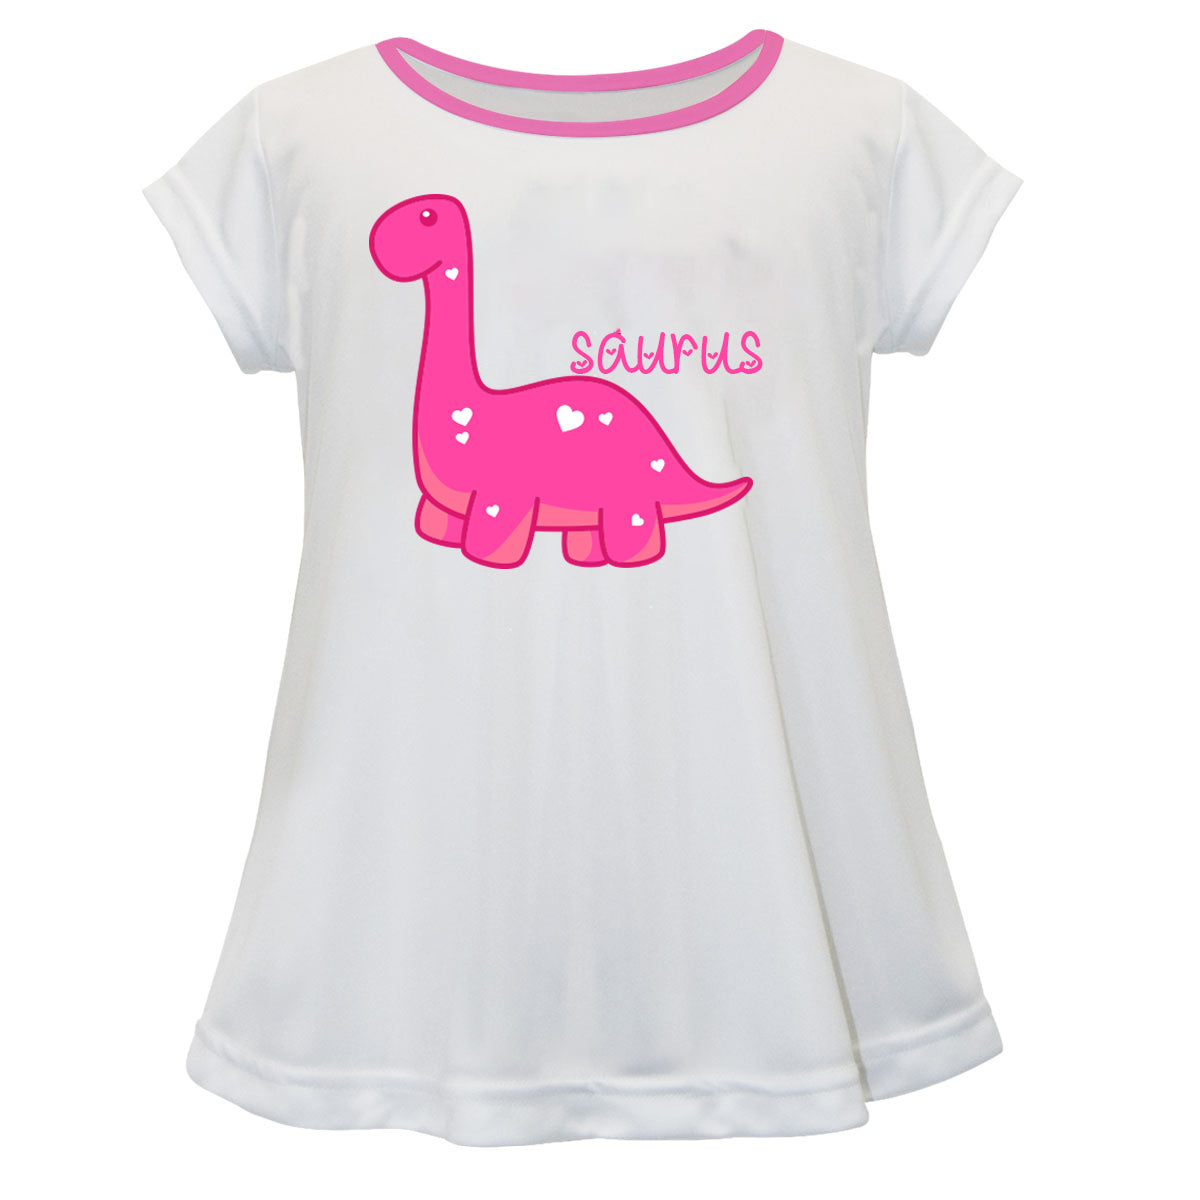 Dinosaur Name White Short Sleeve Laurie Top - Wimziy&Co.